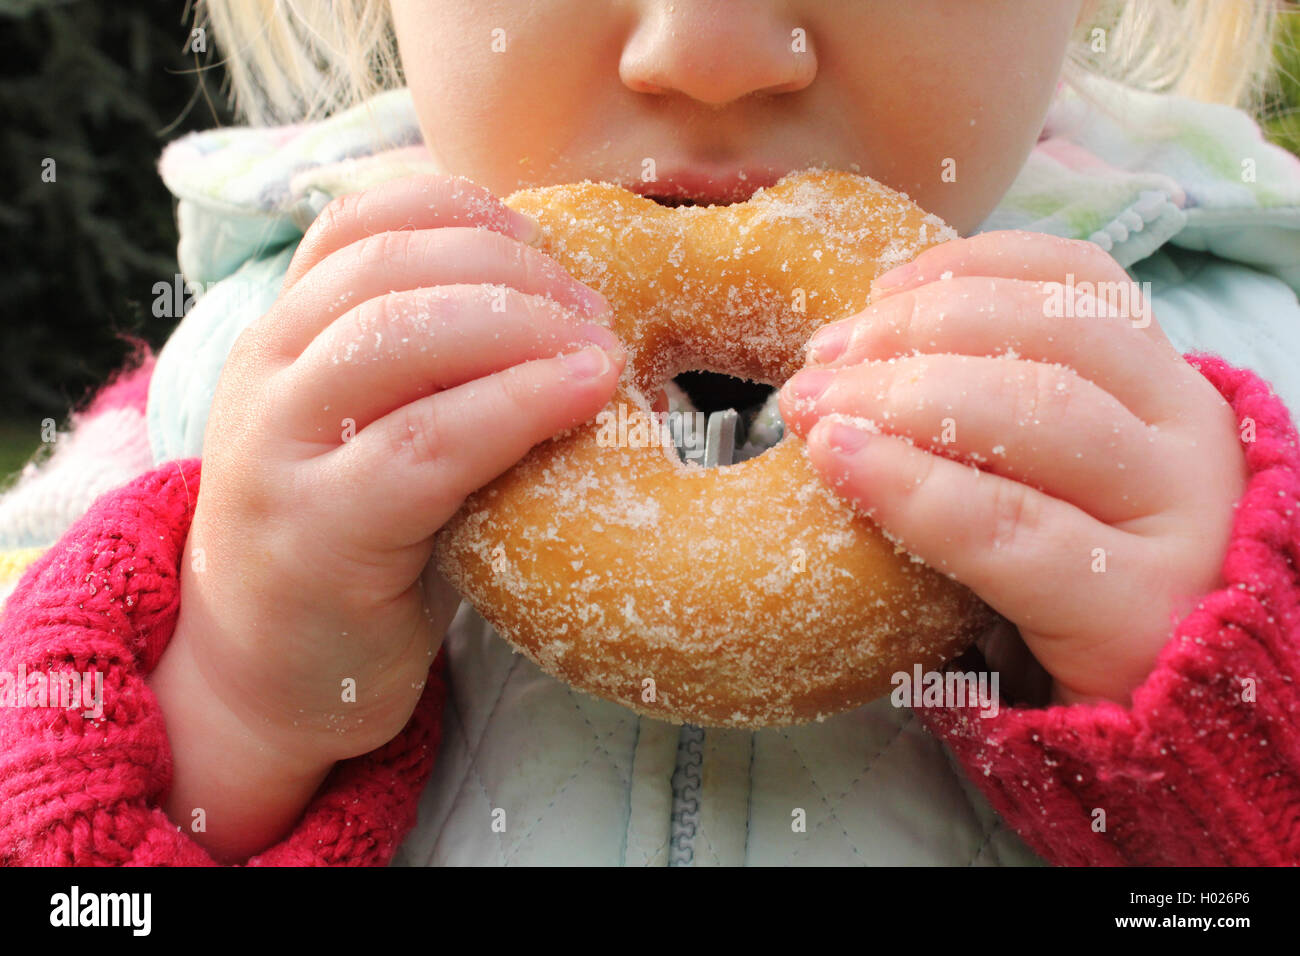 Girl over eating and snacking on unhealthy food Stock Photo